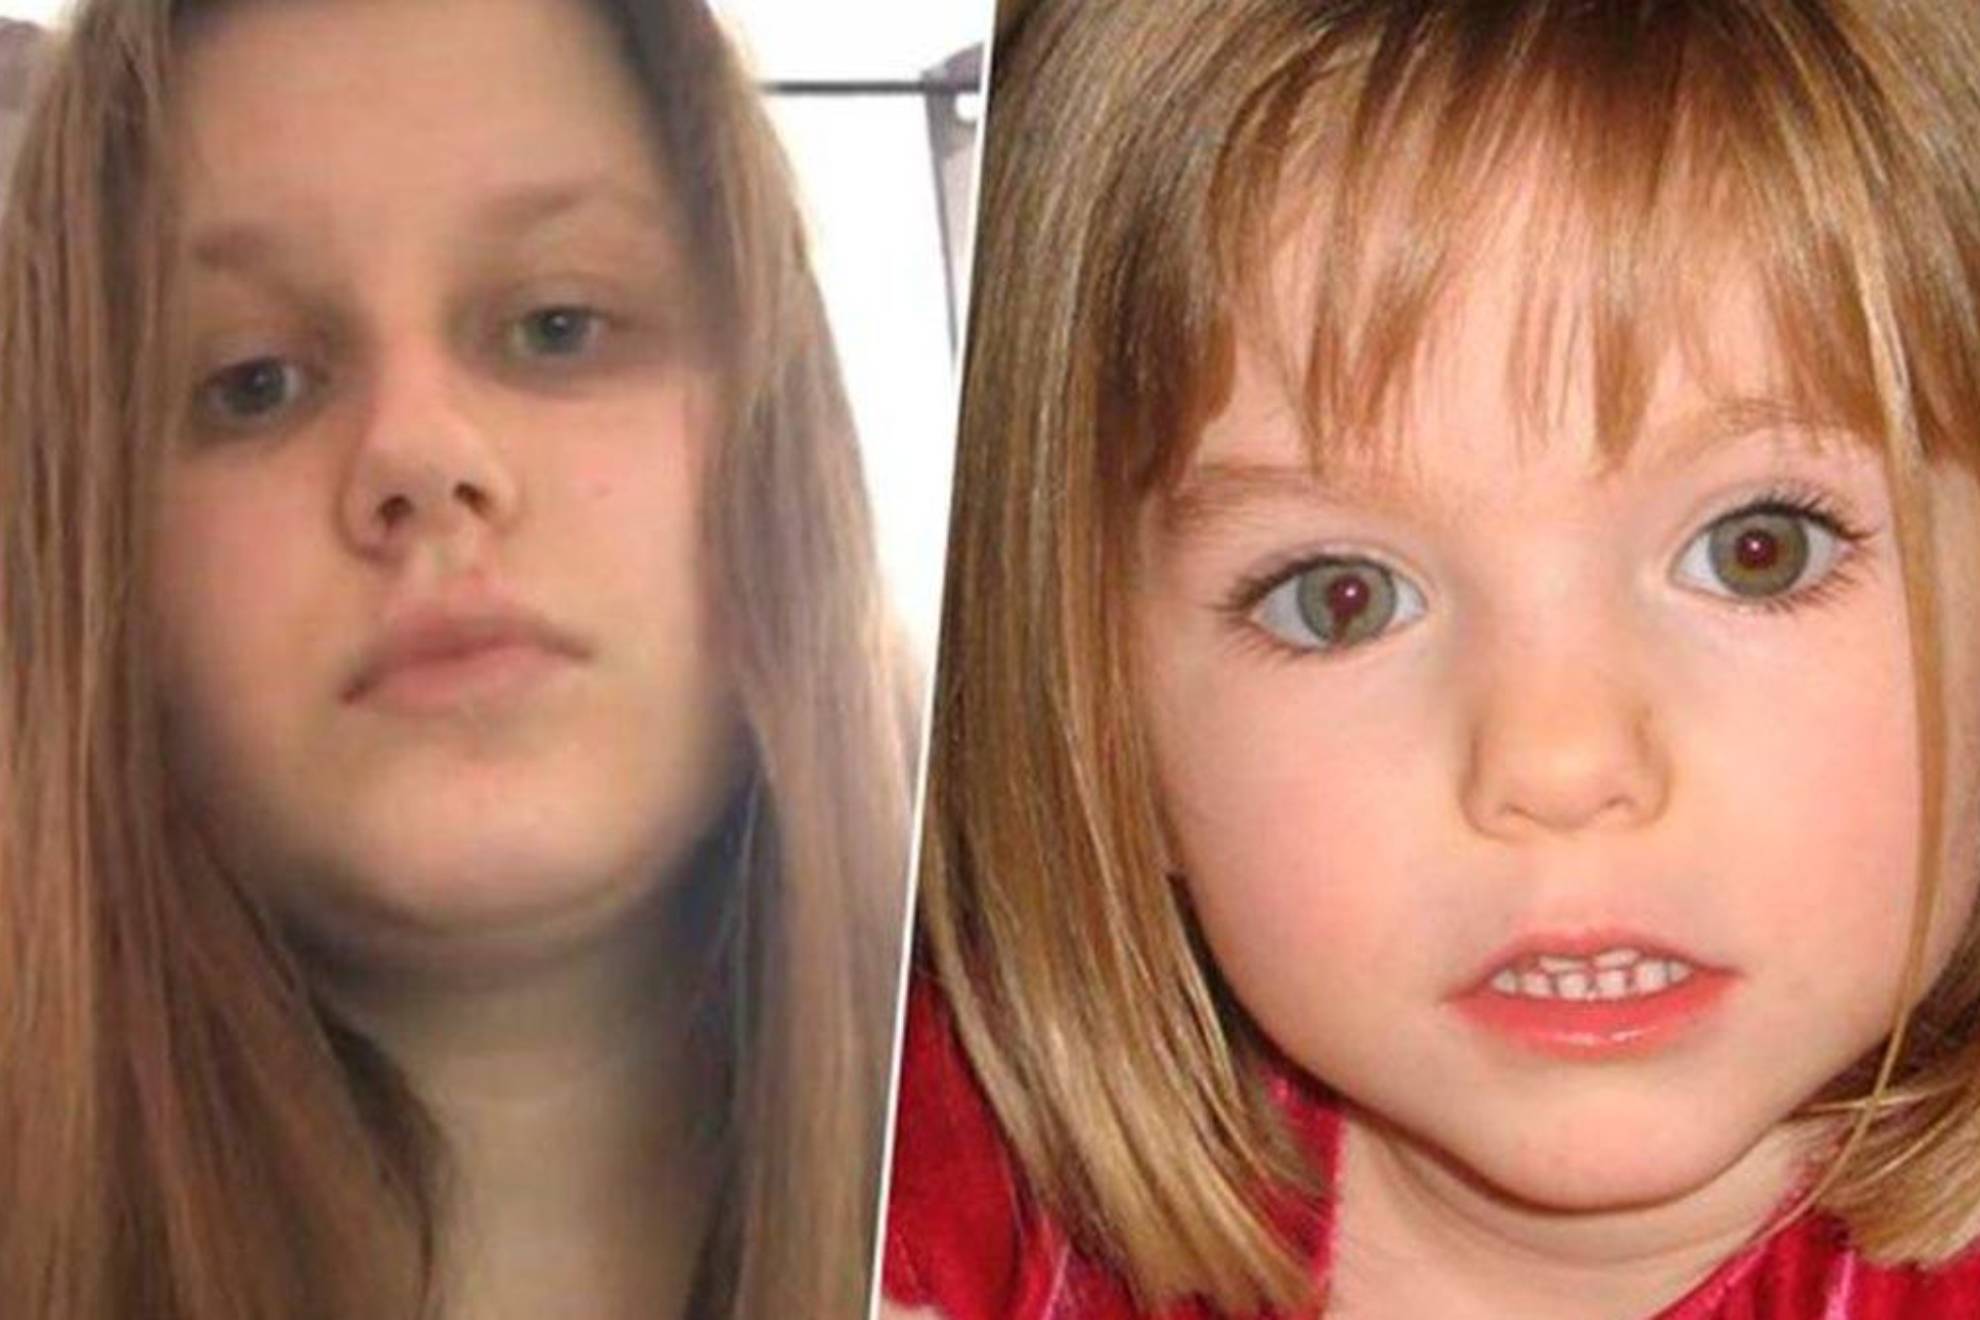 Julia Faustyna Wendel (left) and Madeleine McCann (right).